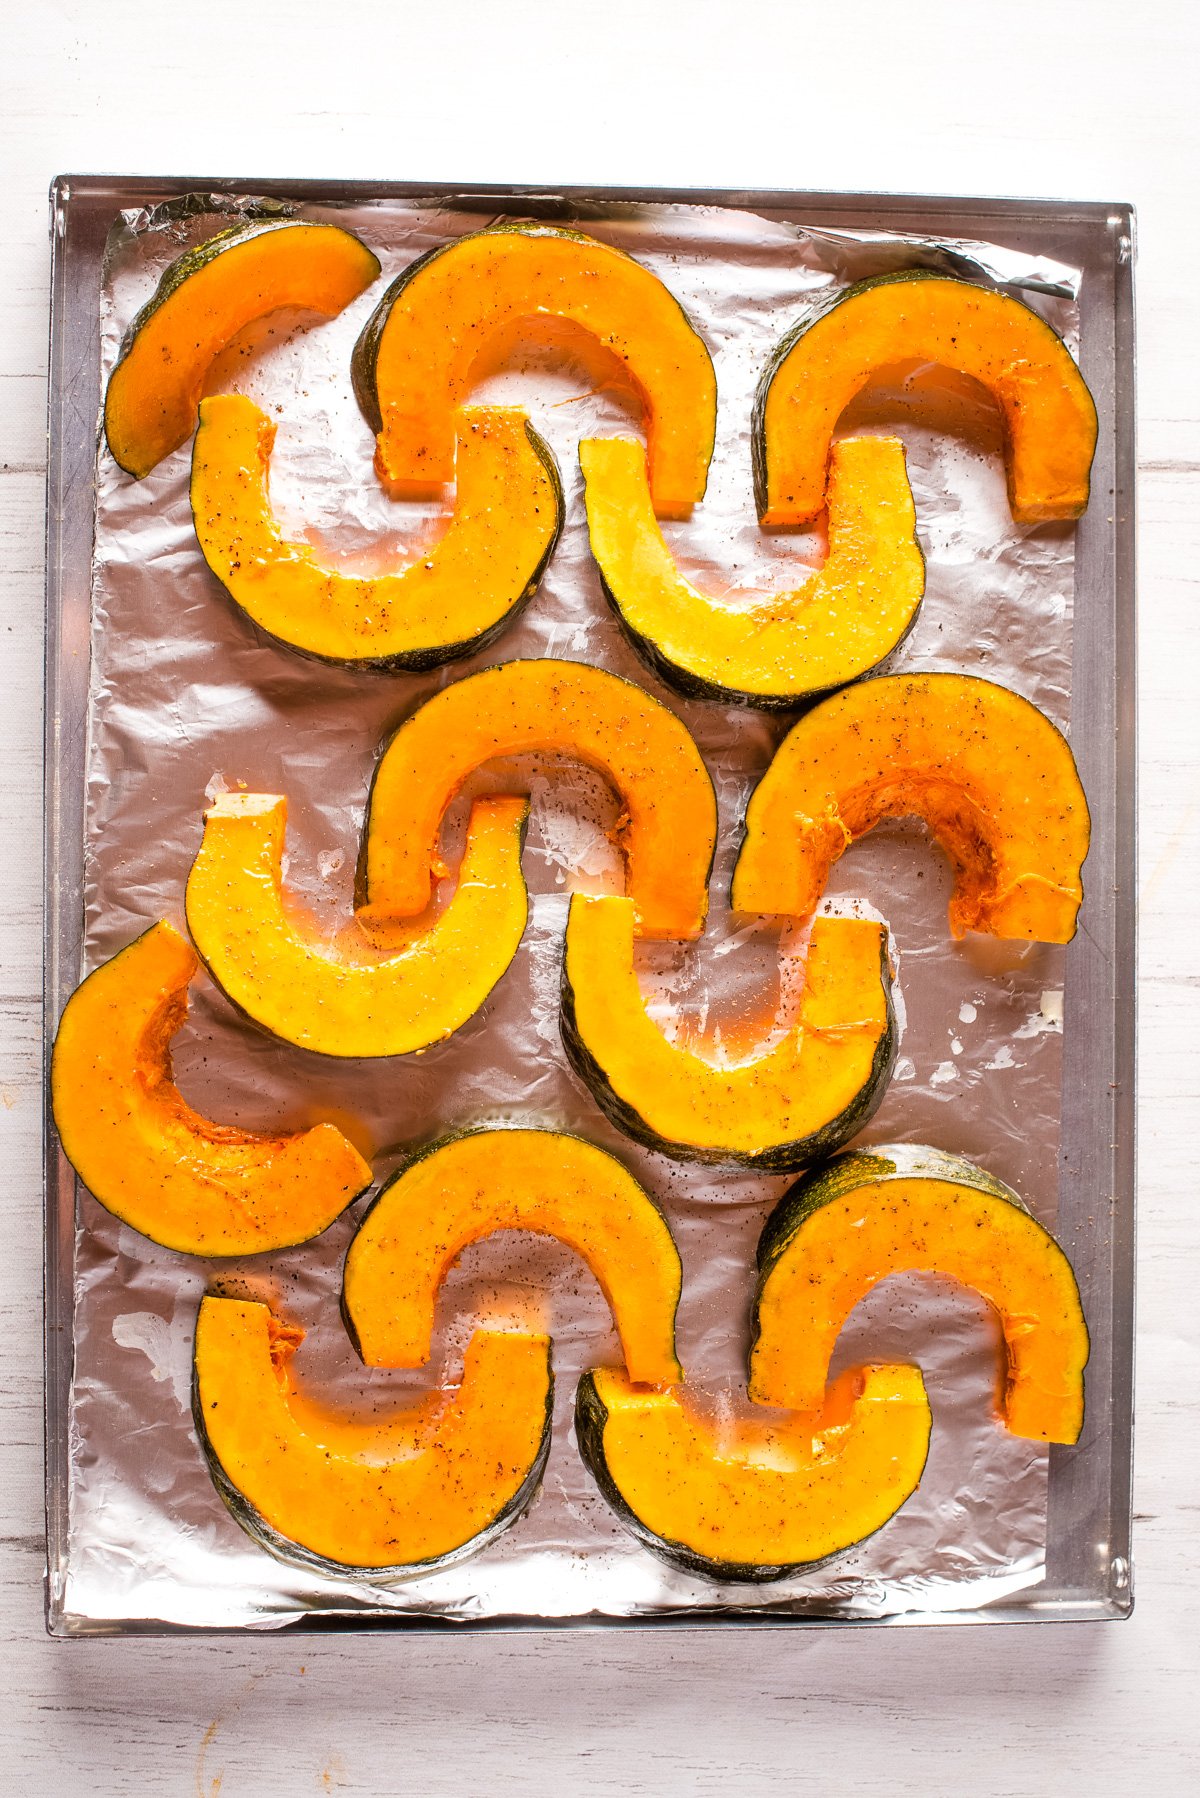 Overhead view of kabocha squash slices on a baking sheet.